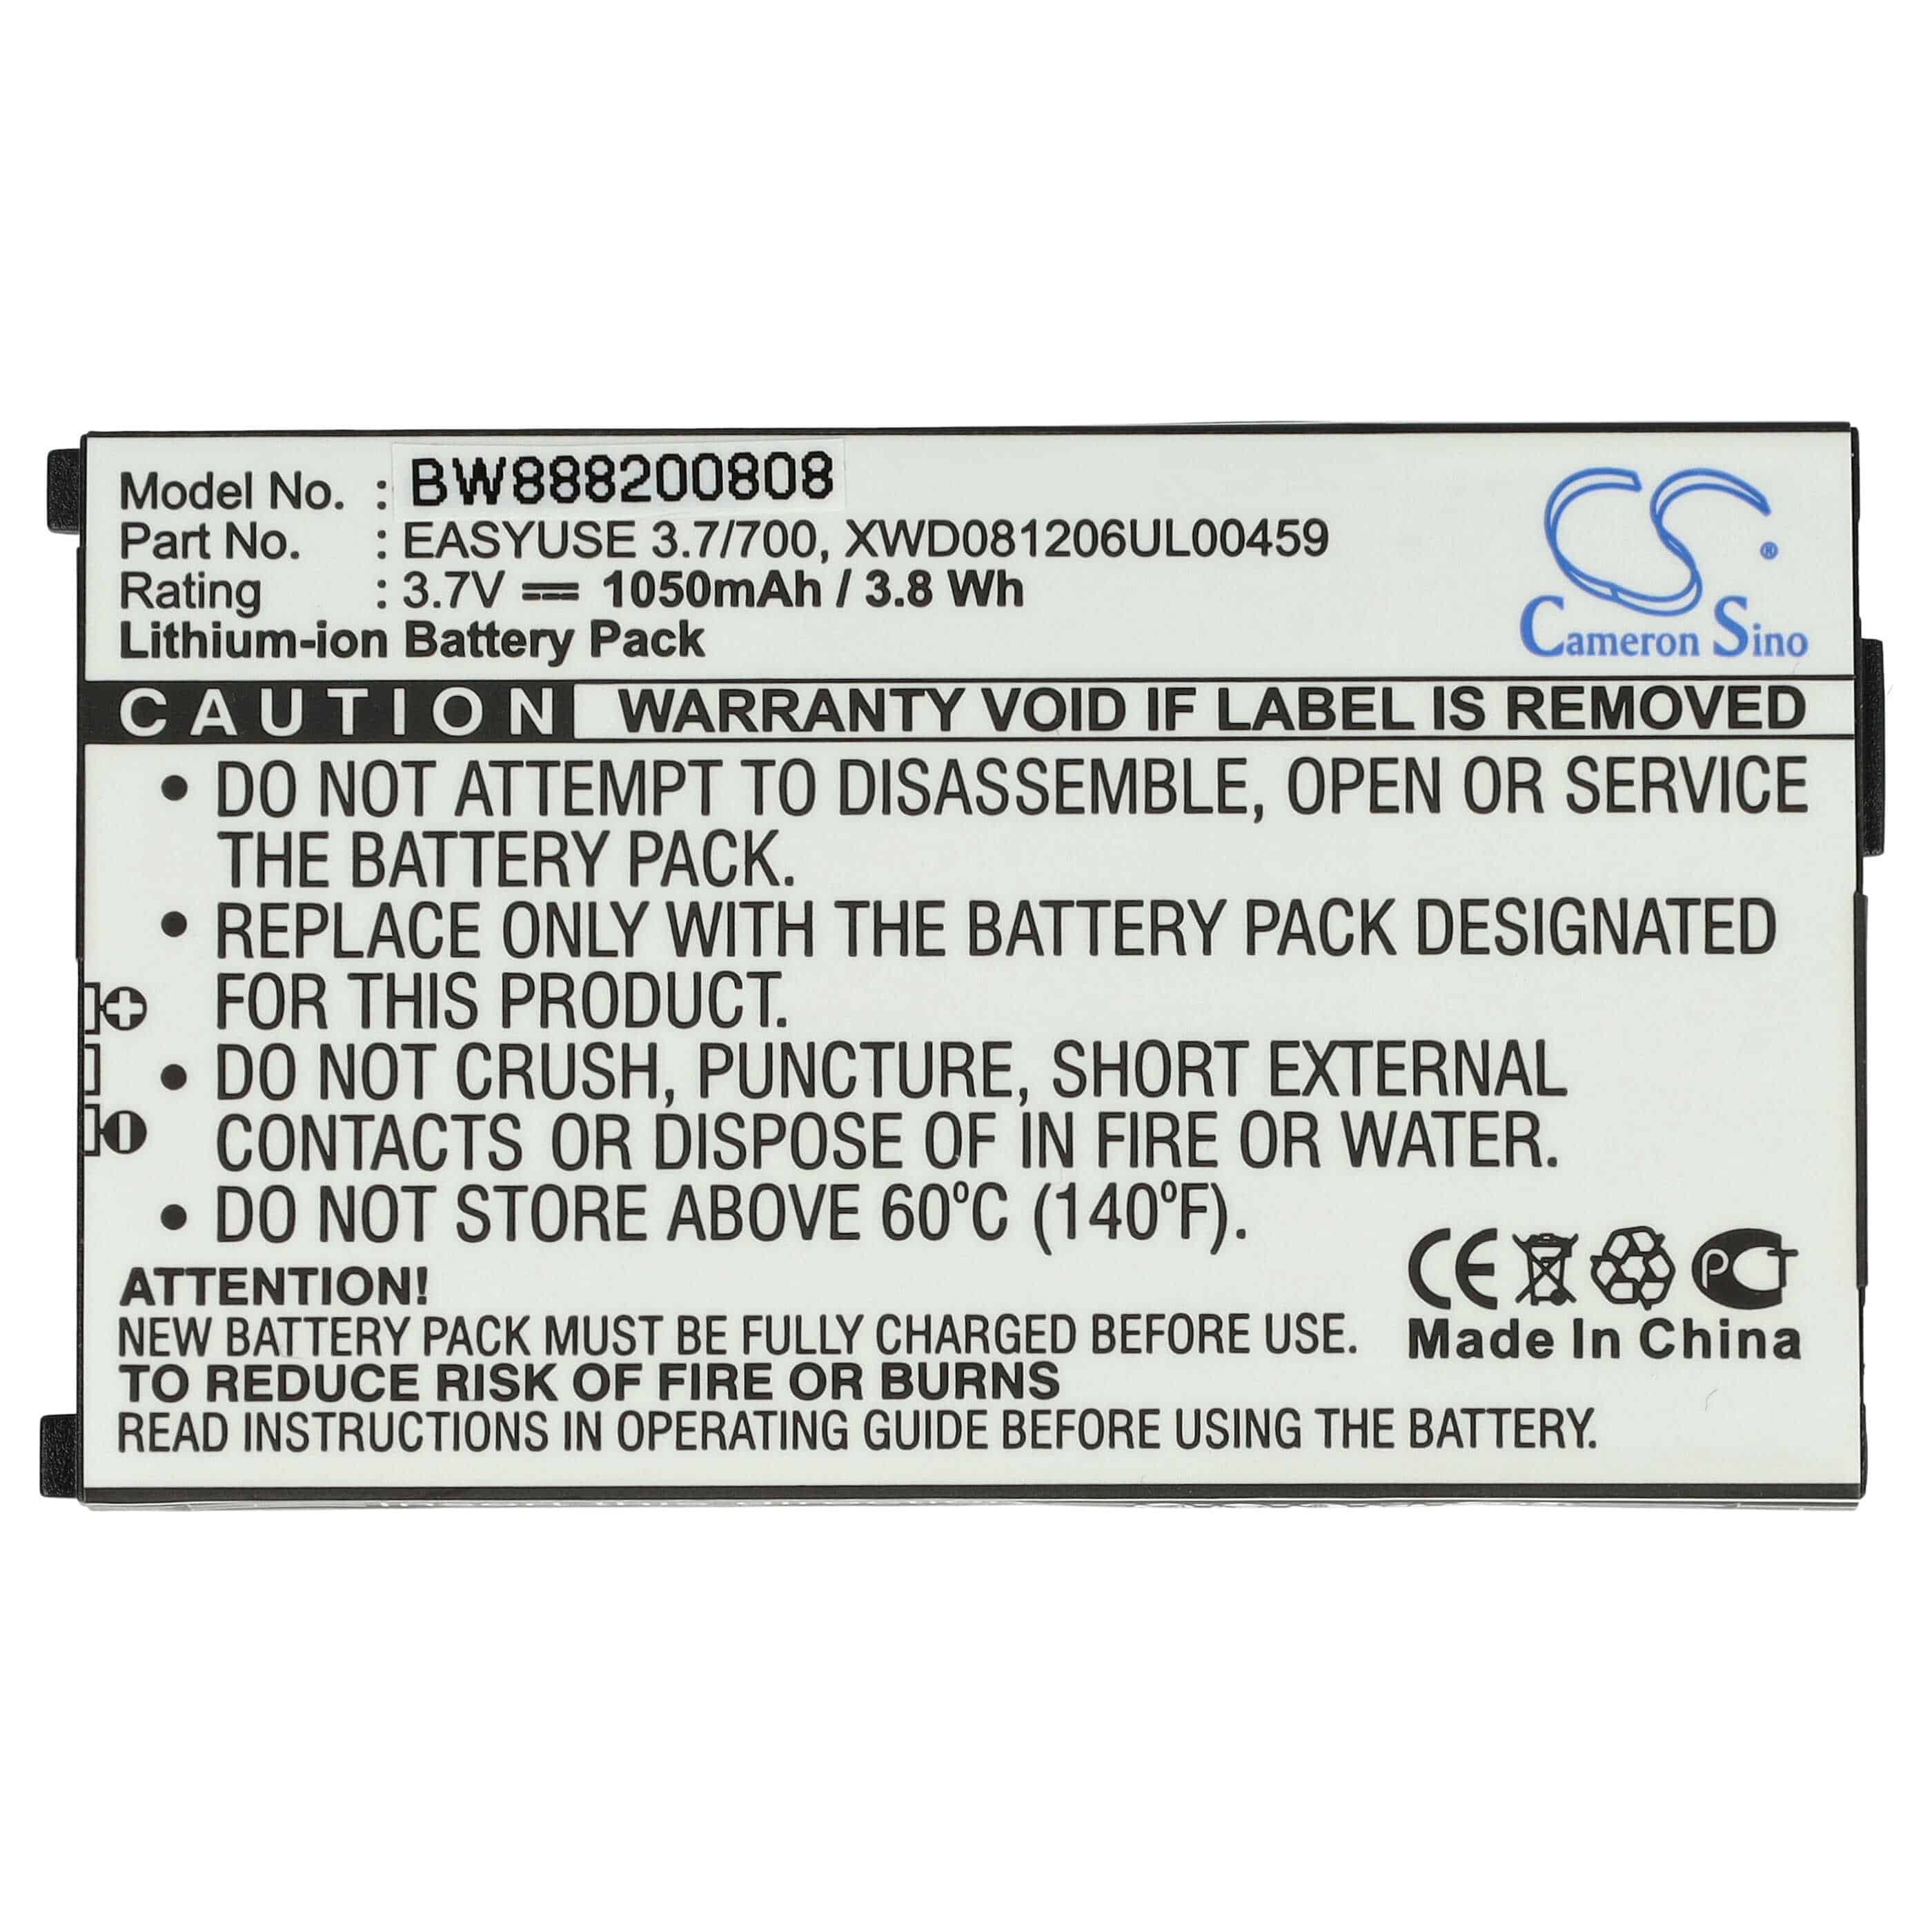 Mobile Phone Battery Replacement for Doro XWD081206UL00459, EASYUSE 3.7/700, DBK-700 - 1050mAh 3.7V Li-Ion